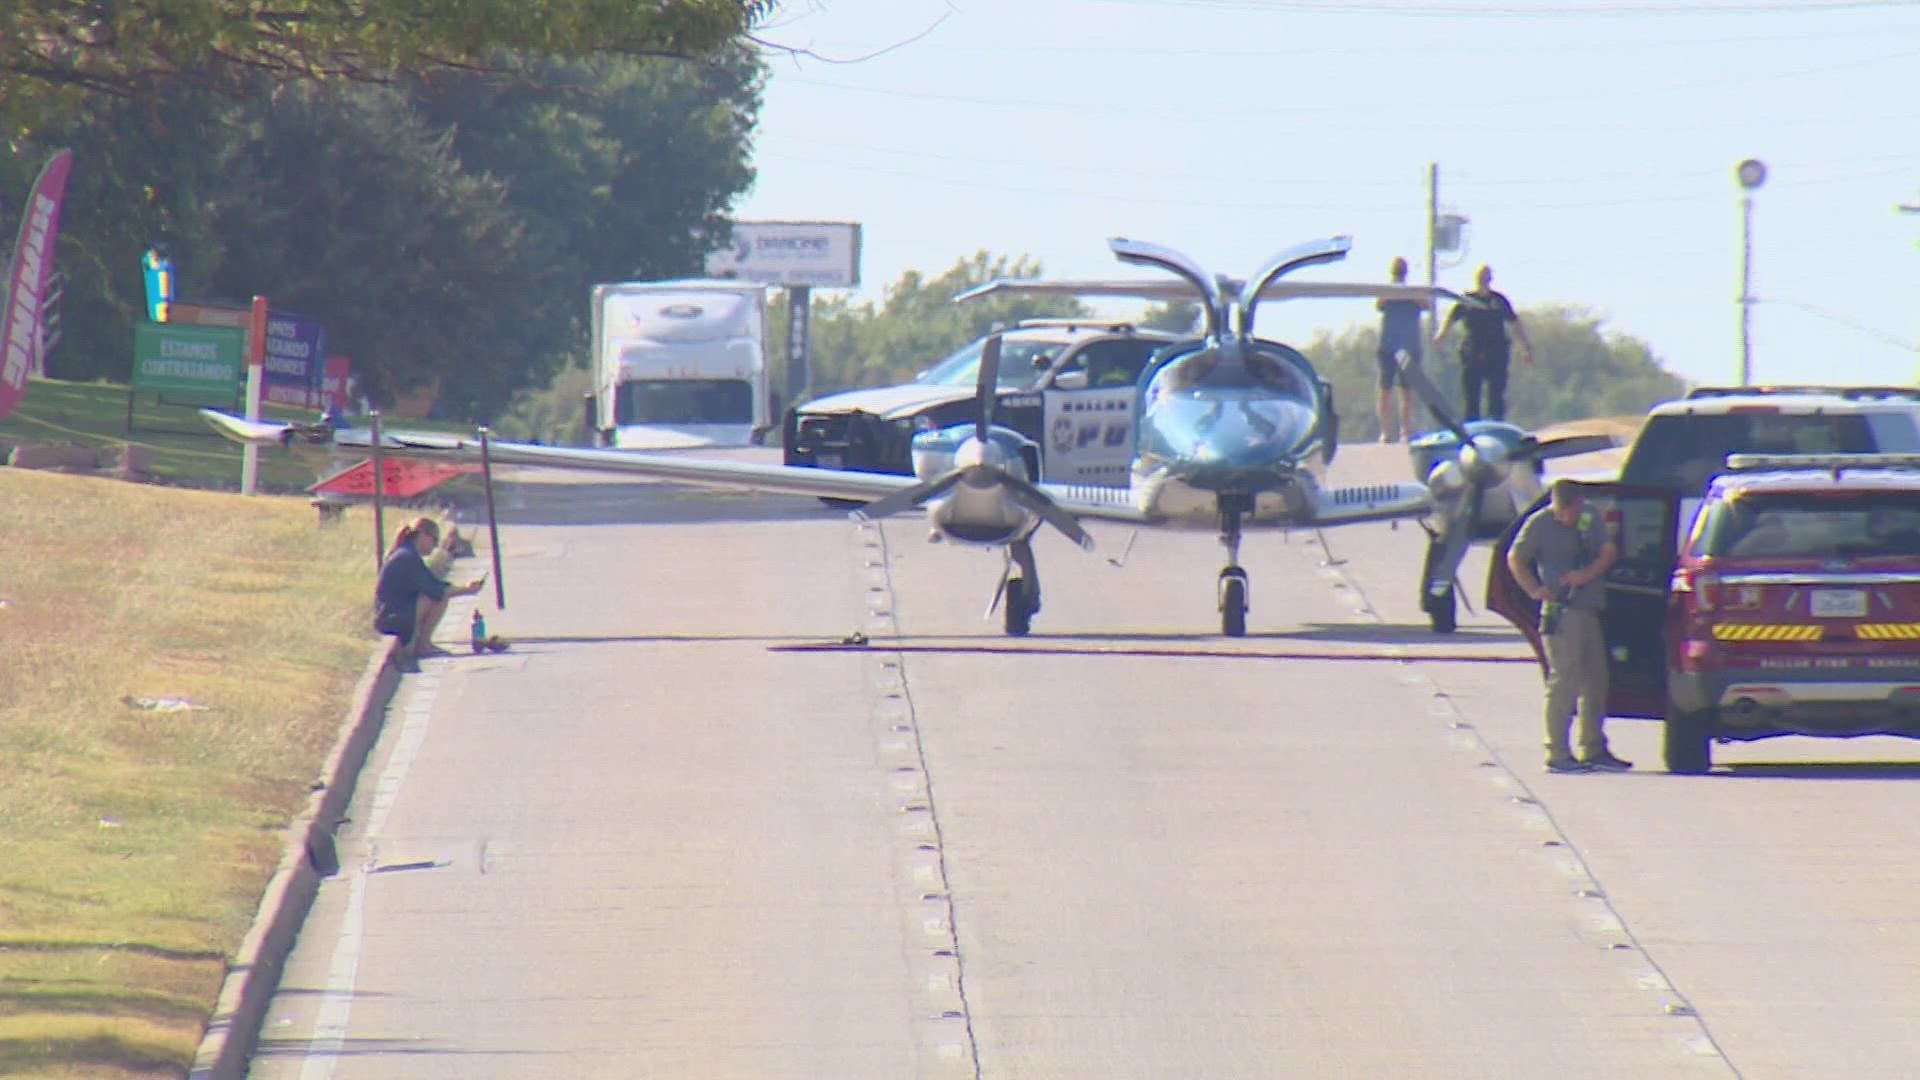 The plane departed from Snyder and reported engine problems before landing. Area streets were closed and power lines were downed, but officials report no injuries.